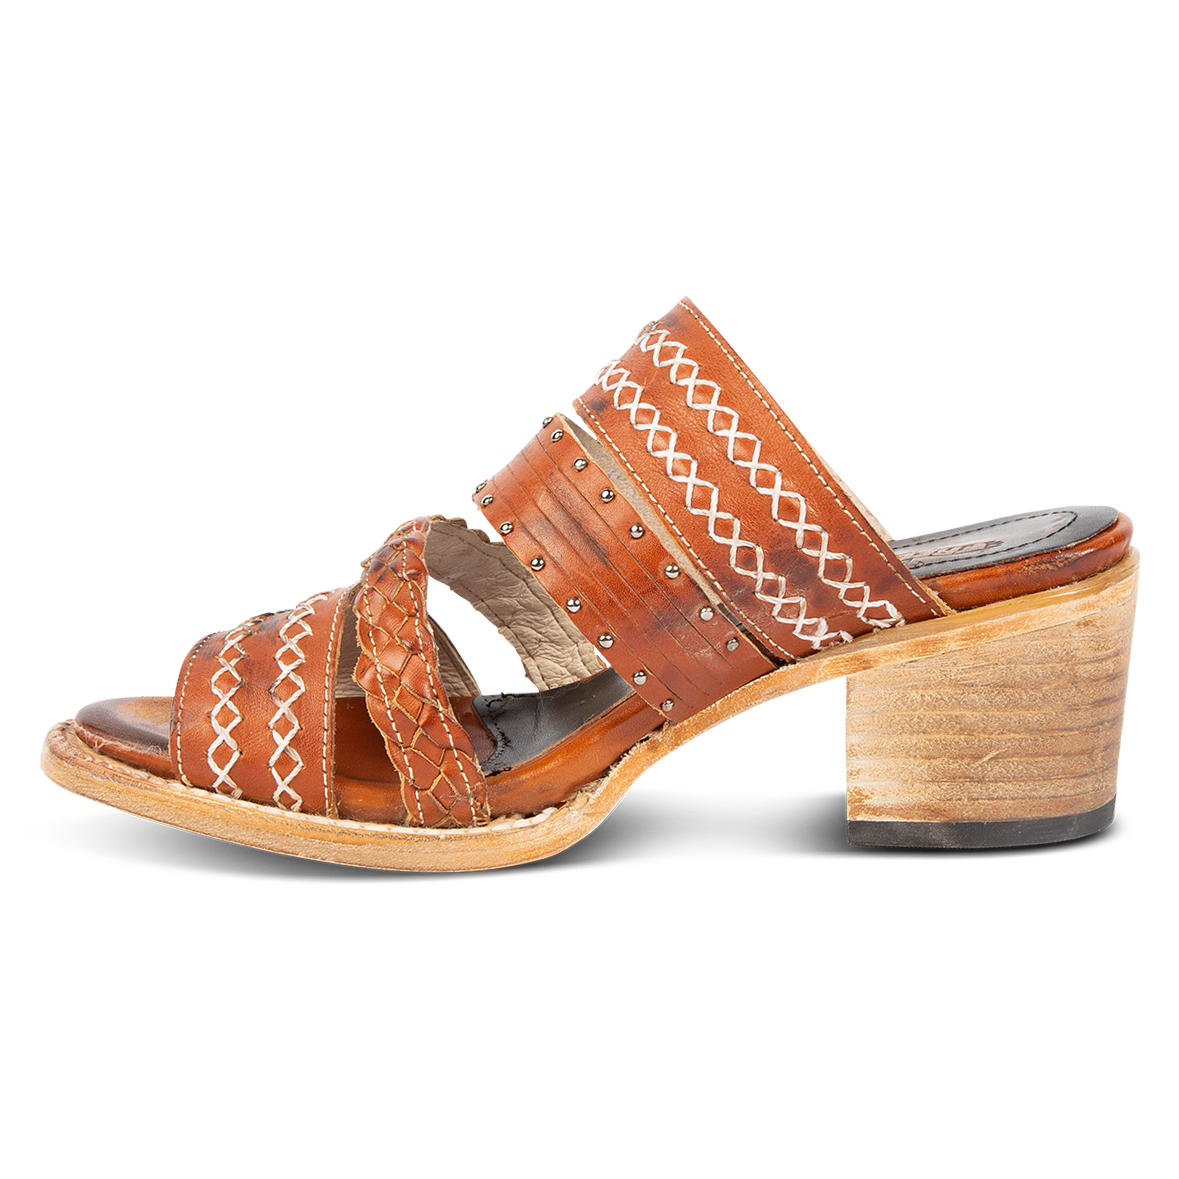 Inside view view showing braided and stitch detailed straps on FREEBIRD women's Albuquerque whiskey open-toe slip-on sandal